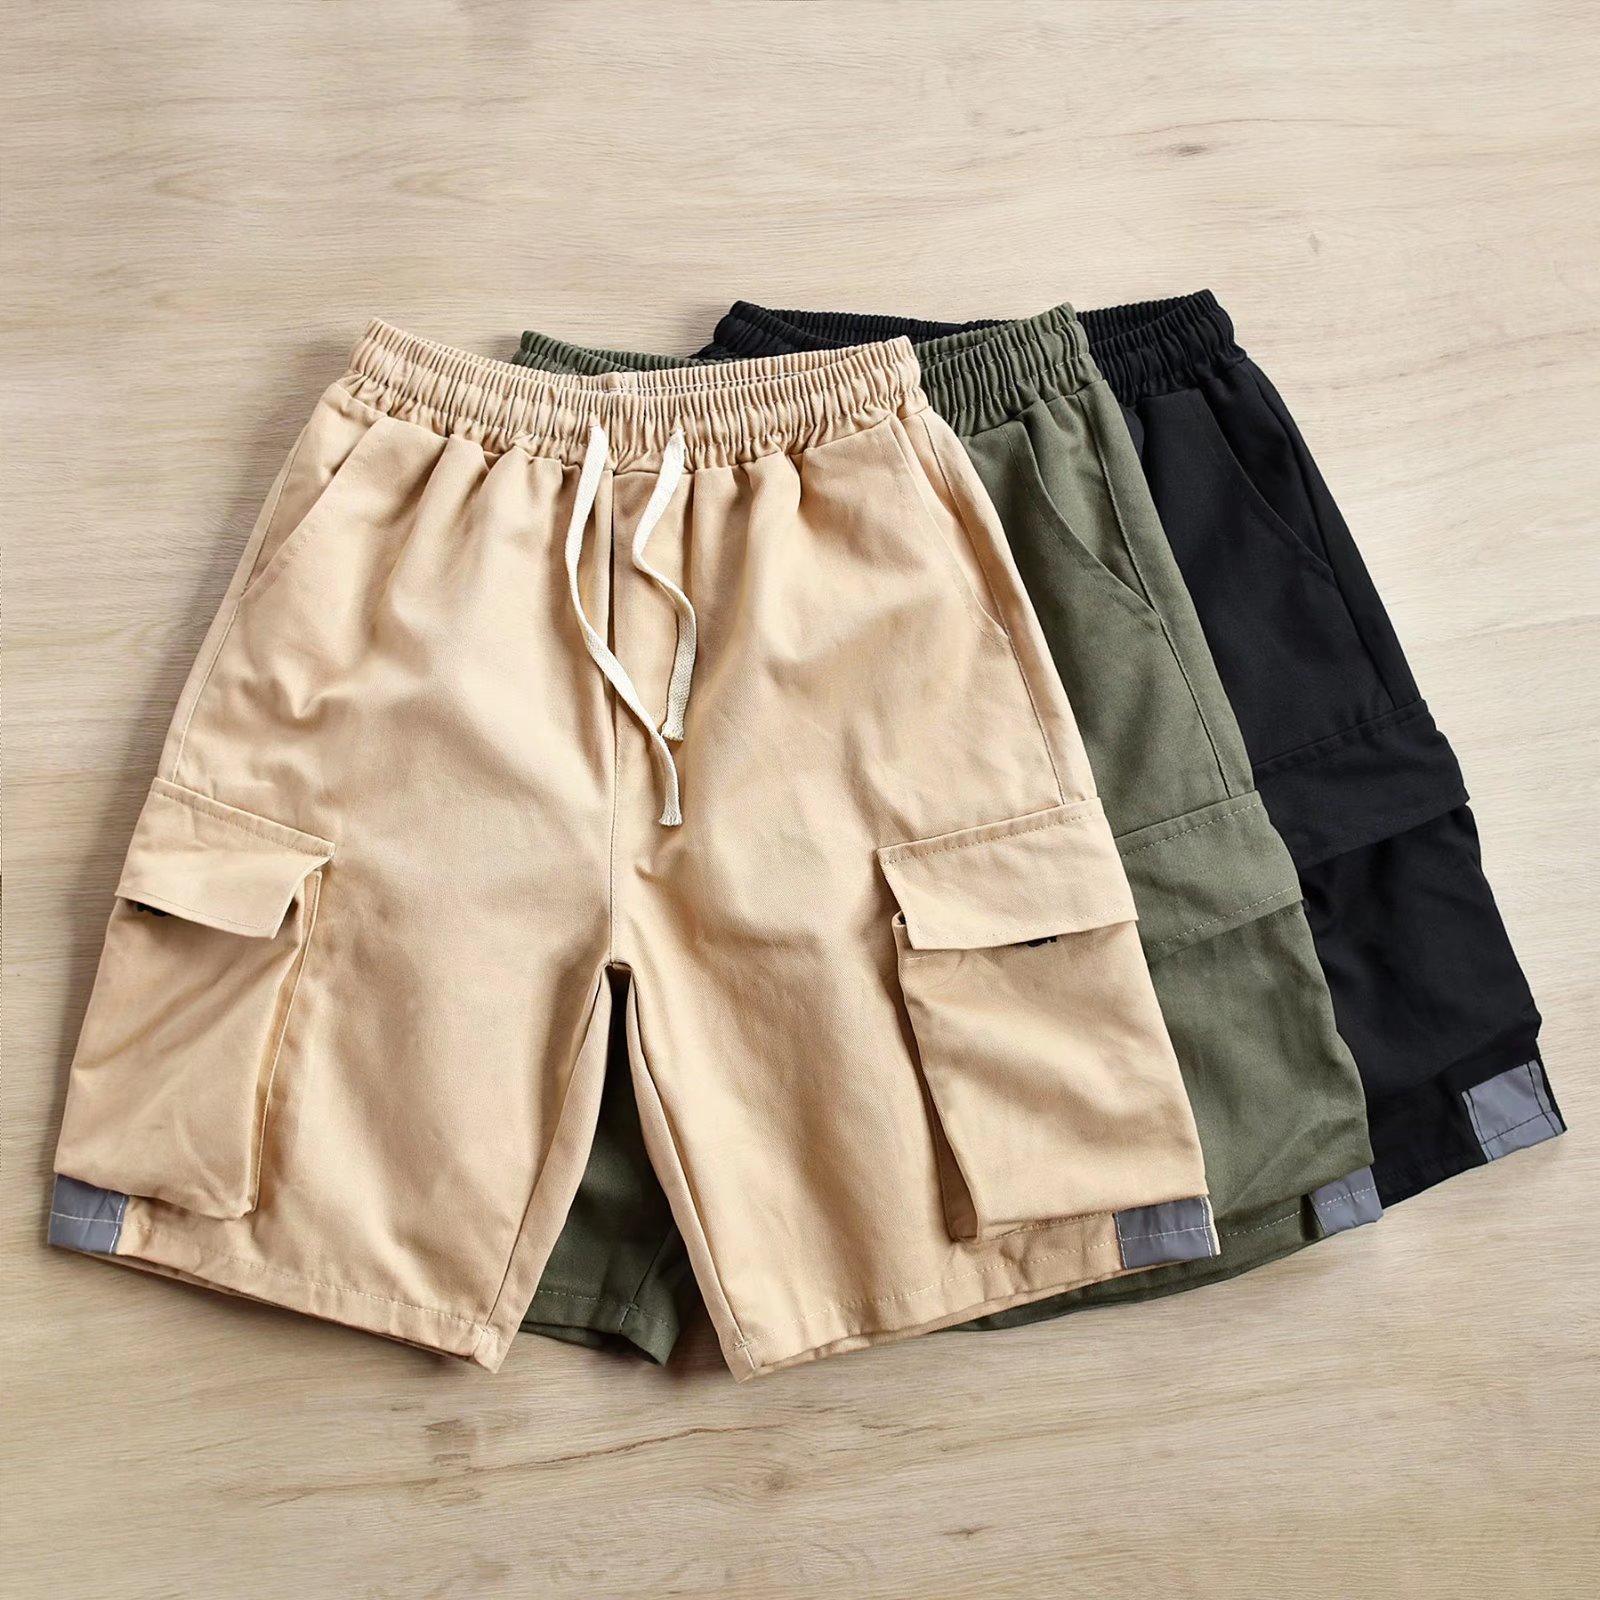 Zhuoneng Clothing Summer Solid Color Workwear Shorts Large Loose Pockets Straight Wide-Leg Pants Fifth Pants Men's Sports Shorts